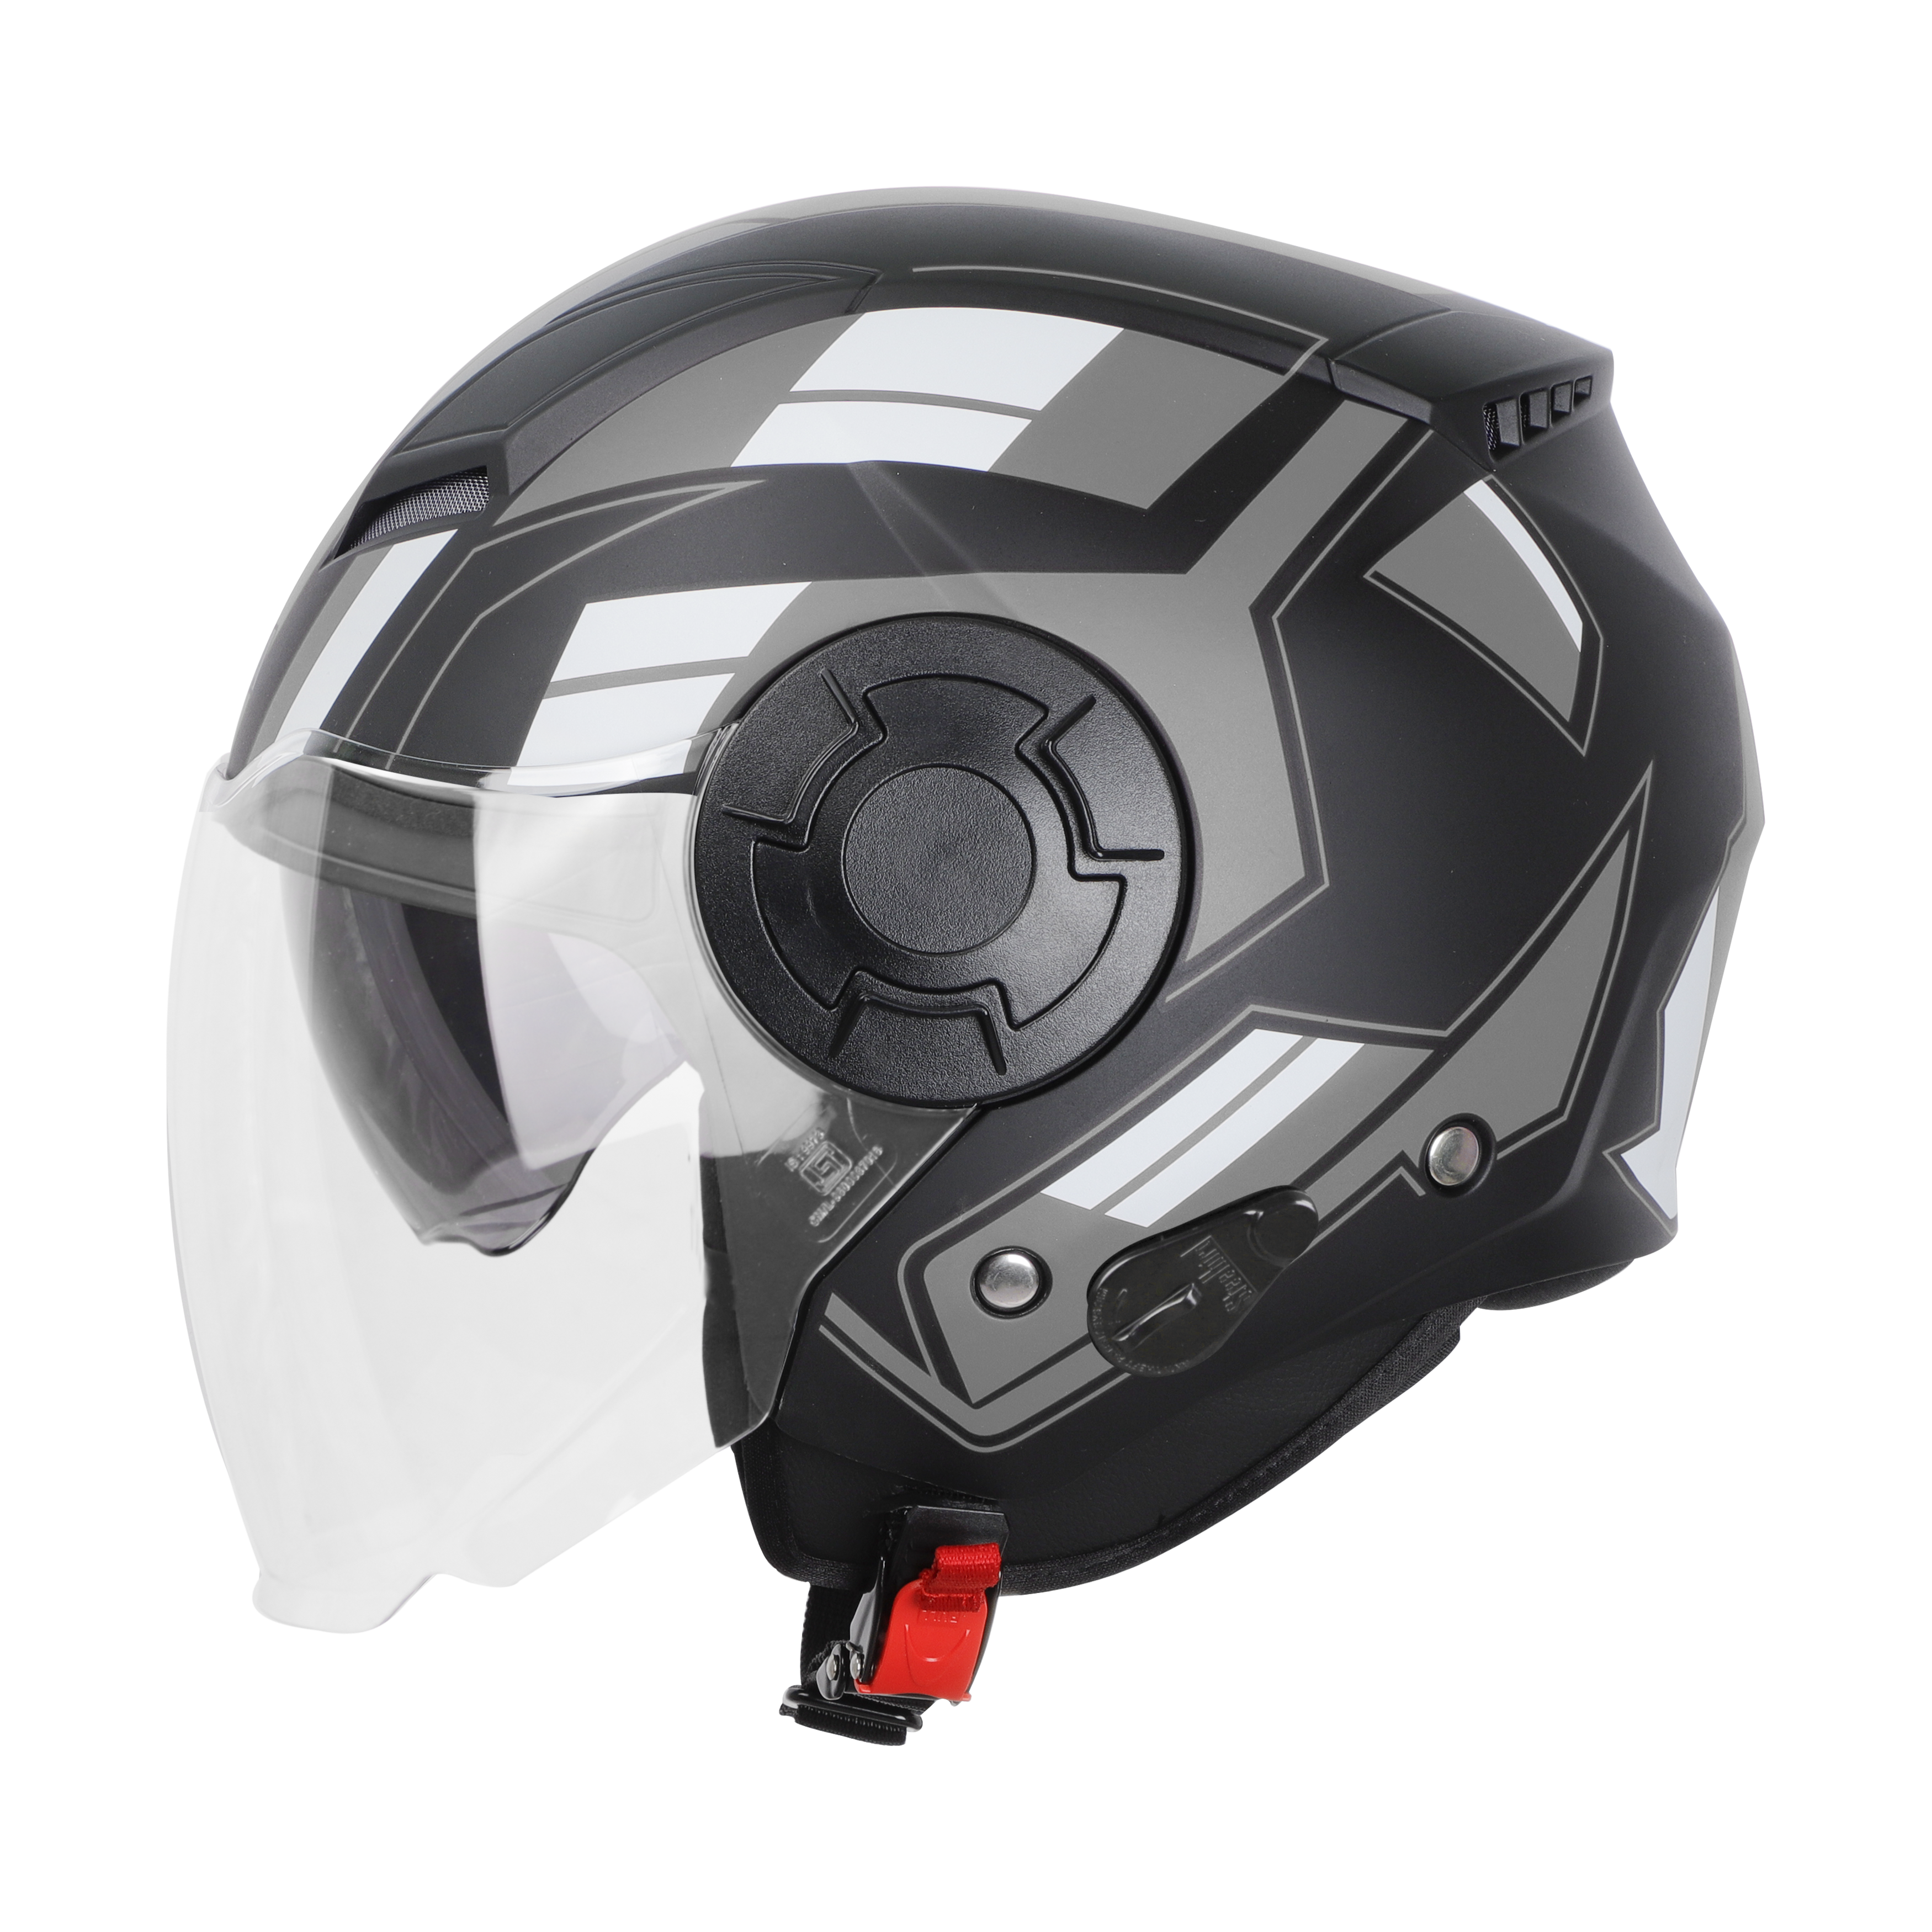 SBH-31 DRX PACE GLOSSY BLACK WITH GREY (WITH INNER SUN SHIELD)